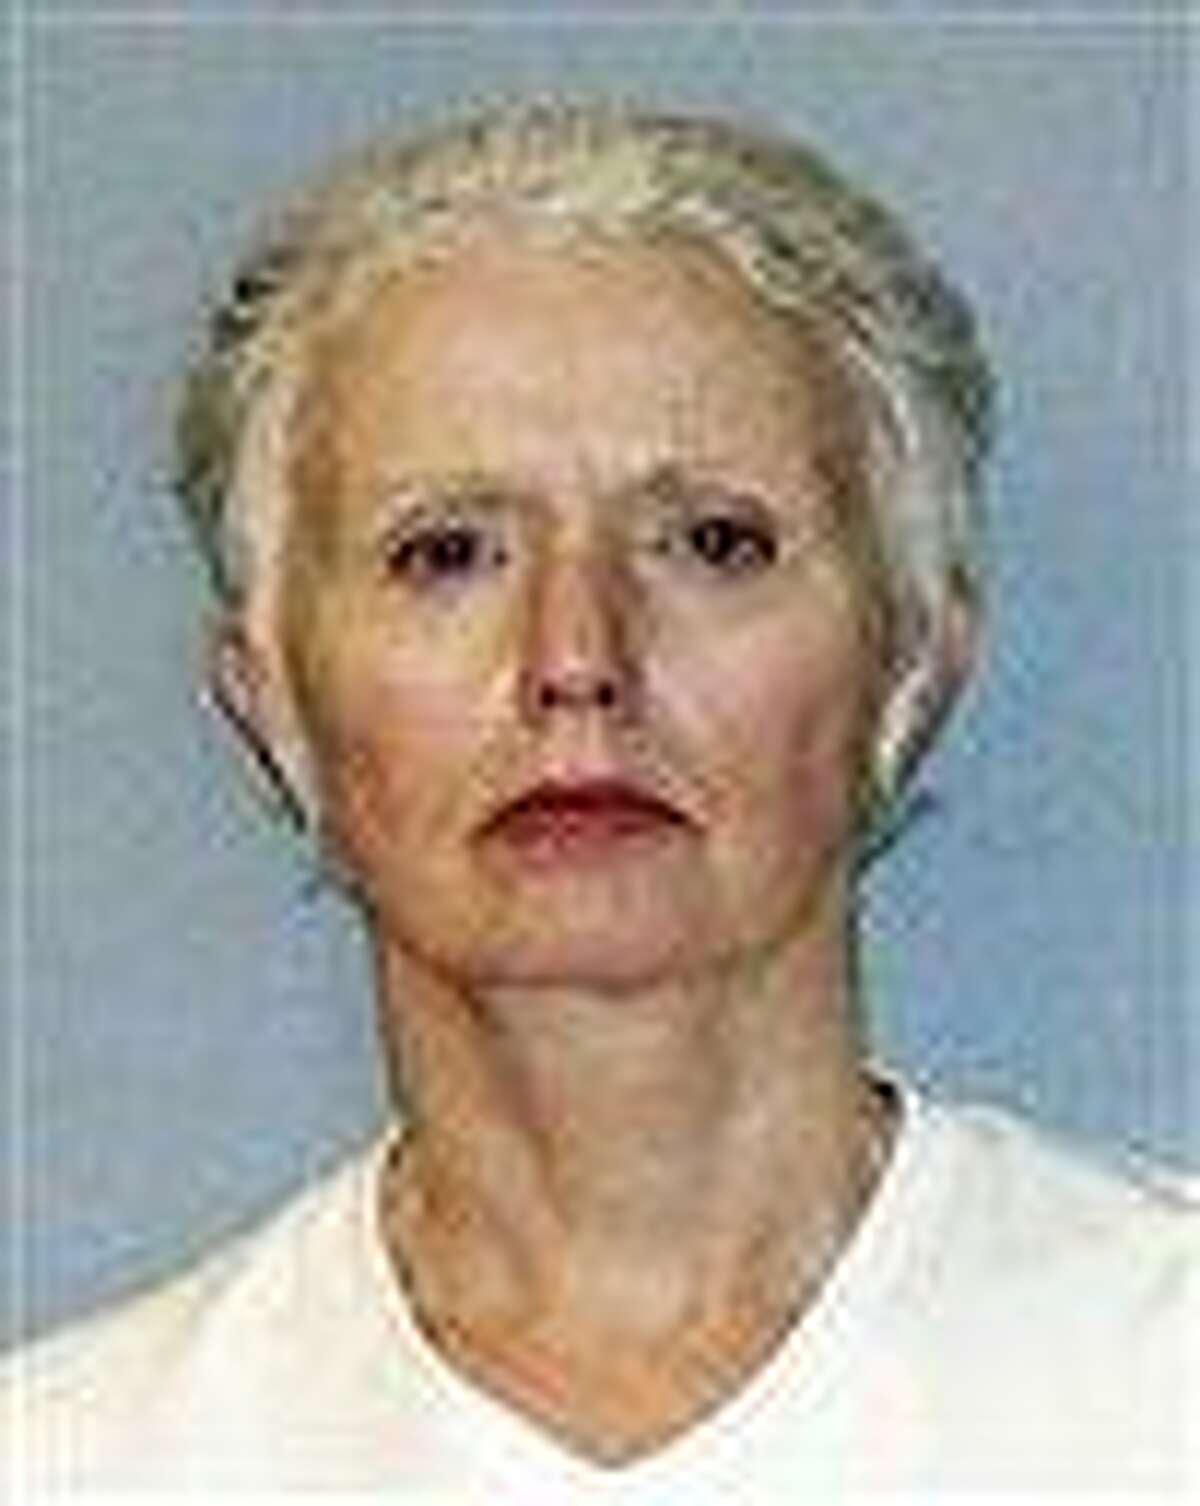 This undated file photo provided by the U.S. Marshals Service shows Catherine Greig, longtime girlfriend of Whitey Bulger, who was captured with Bulger June 22, 2011, in Santa Monica, Calif. Greig faces a maximum of 15 years in prison when she is sentenced for helping to hide Bulger for 16 years. Associated Press